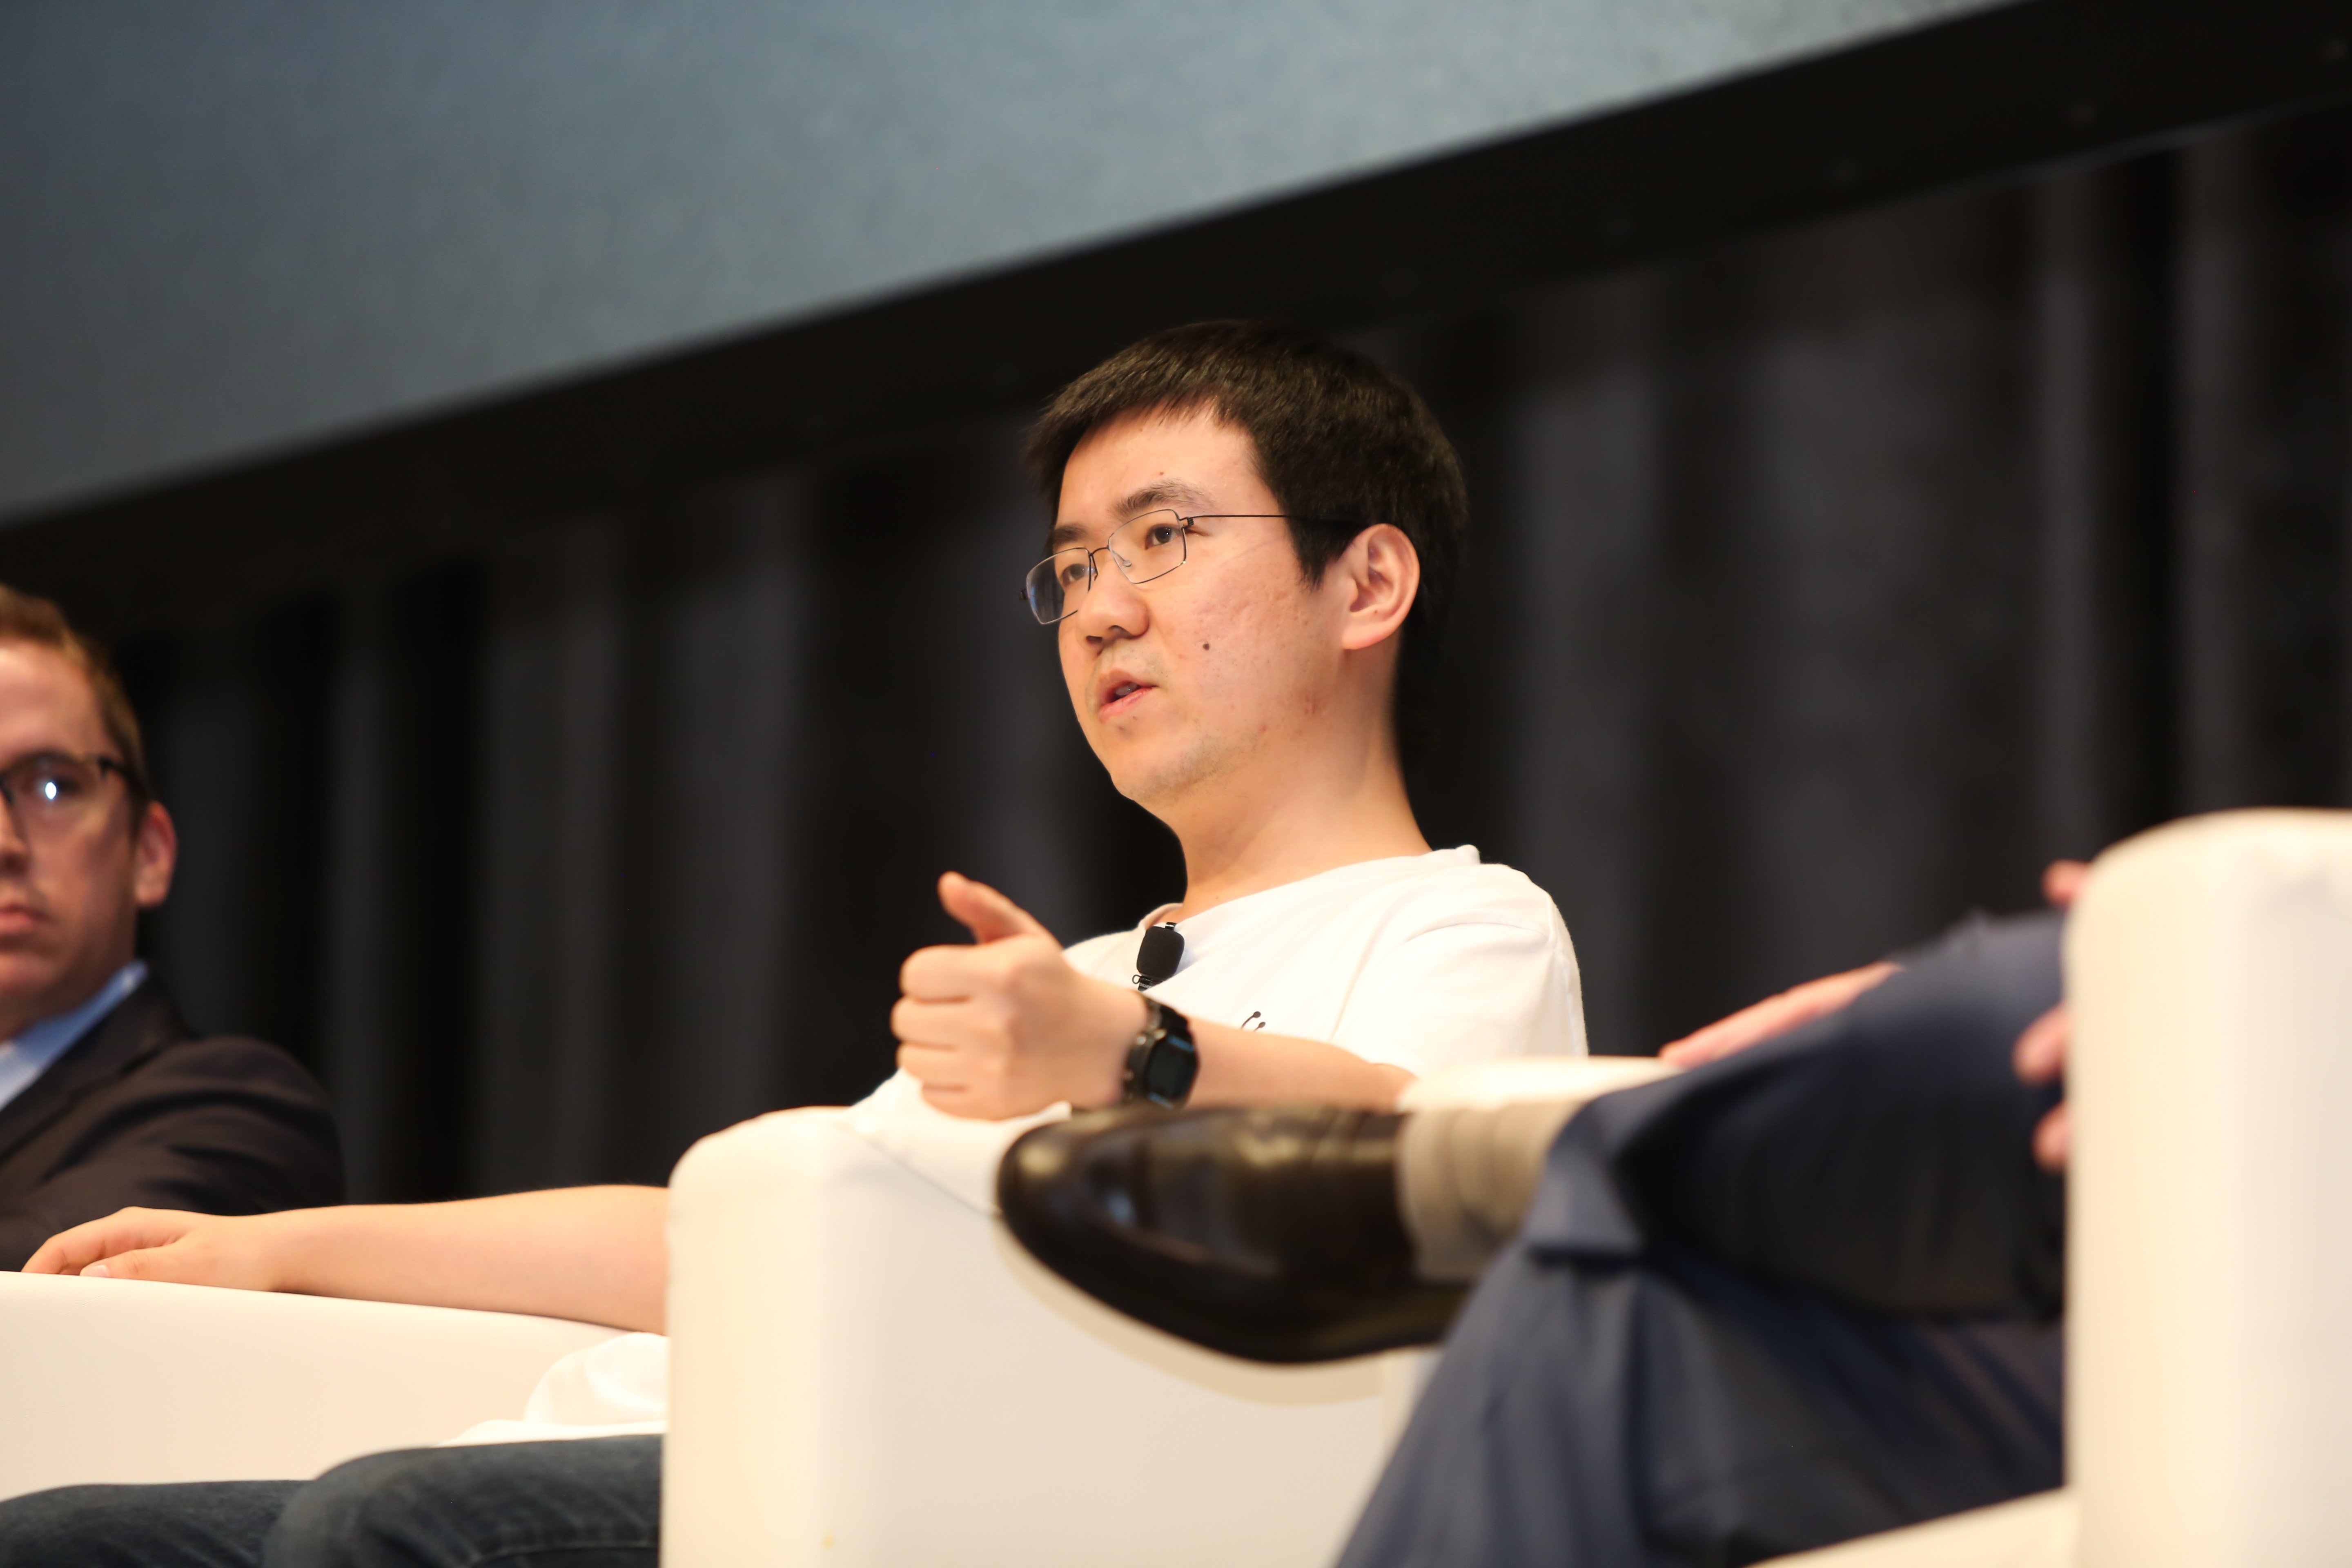 Bitcoin Mining Giant Bitmain Just Officially Filed For An IPO